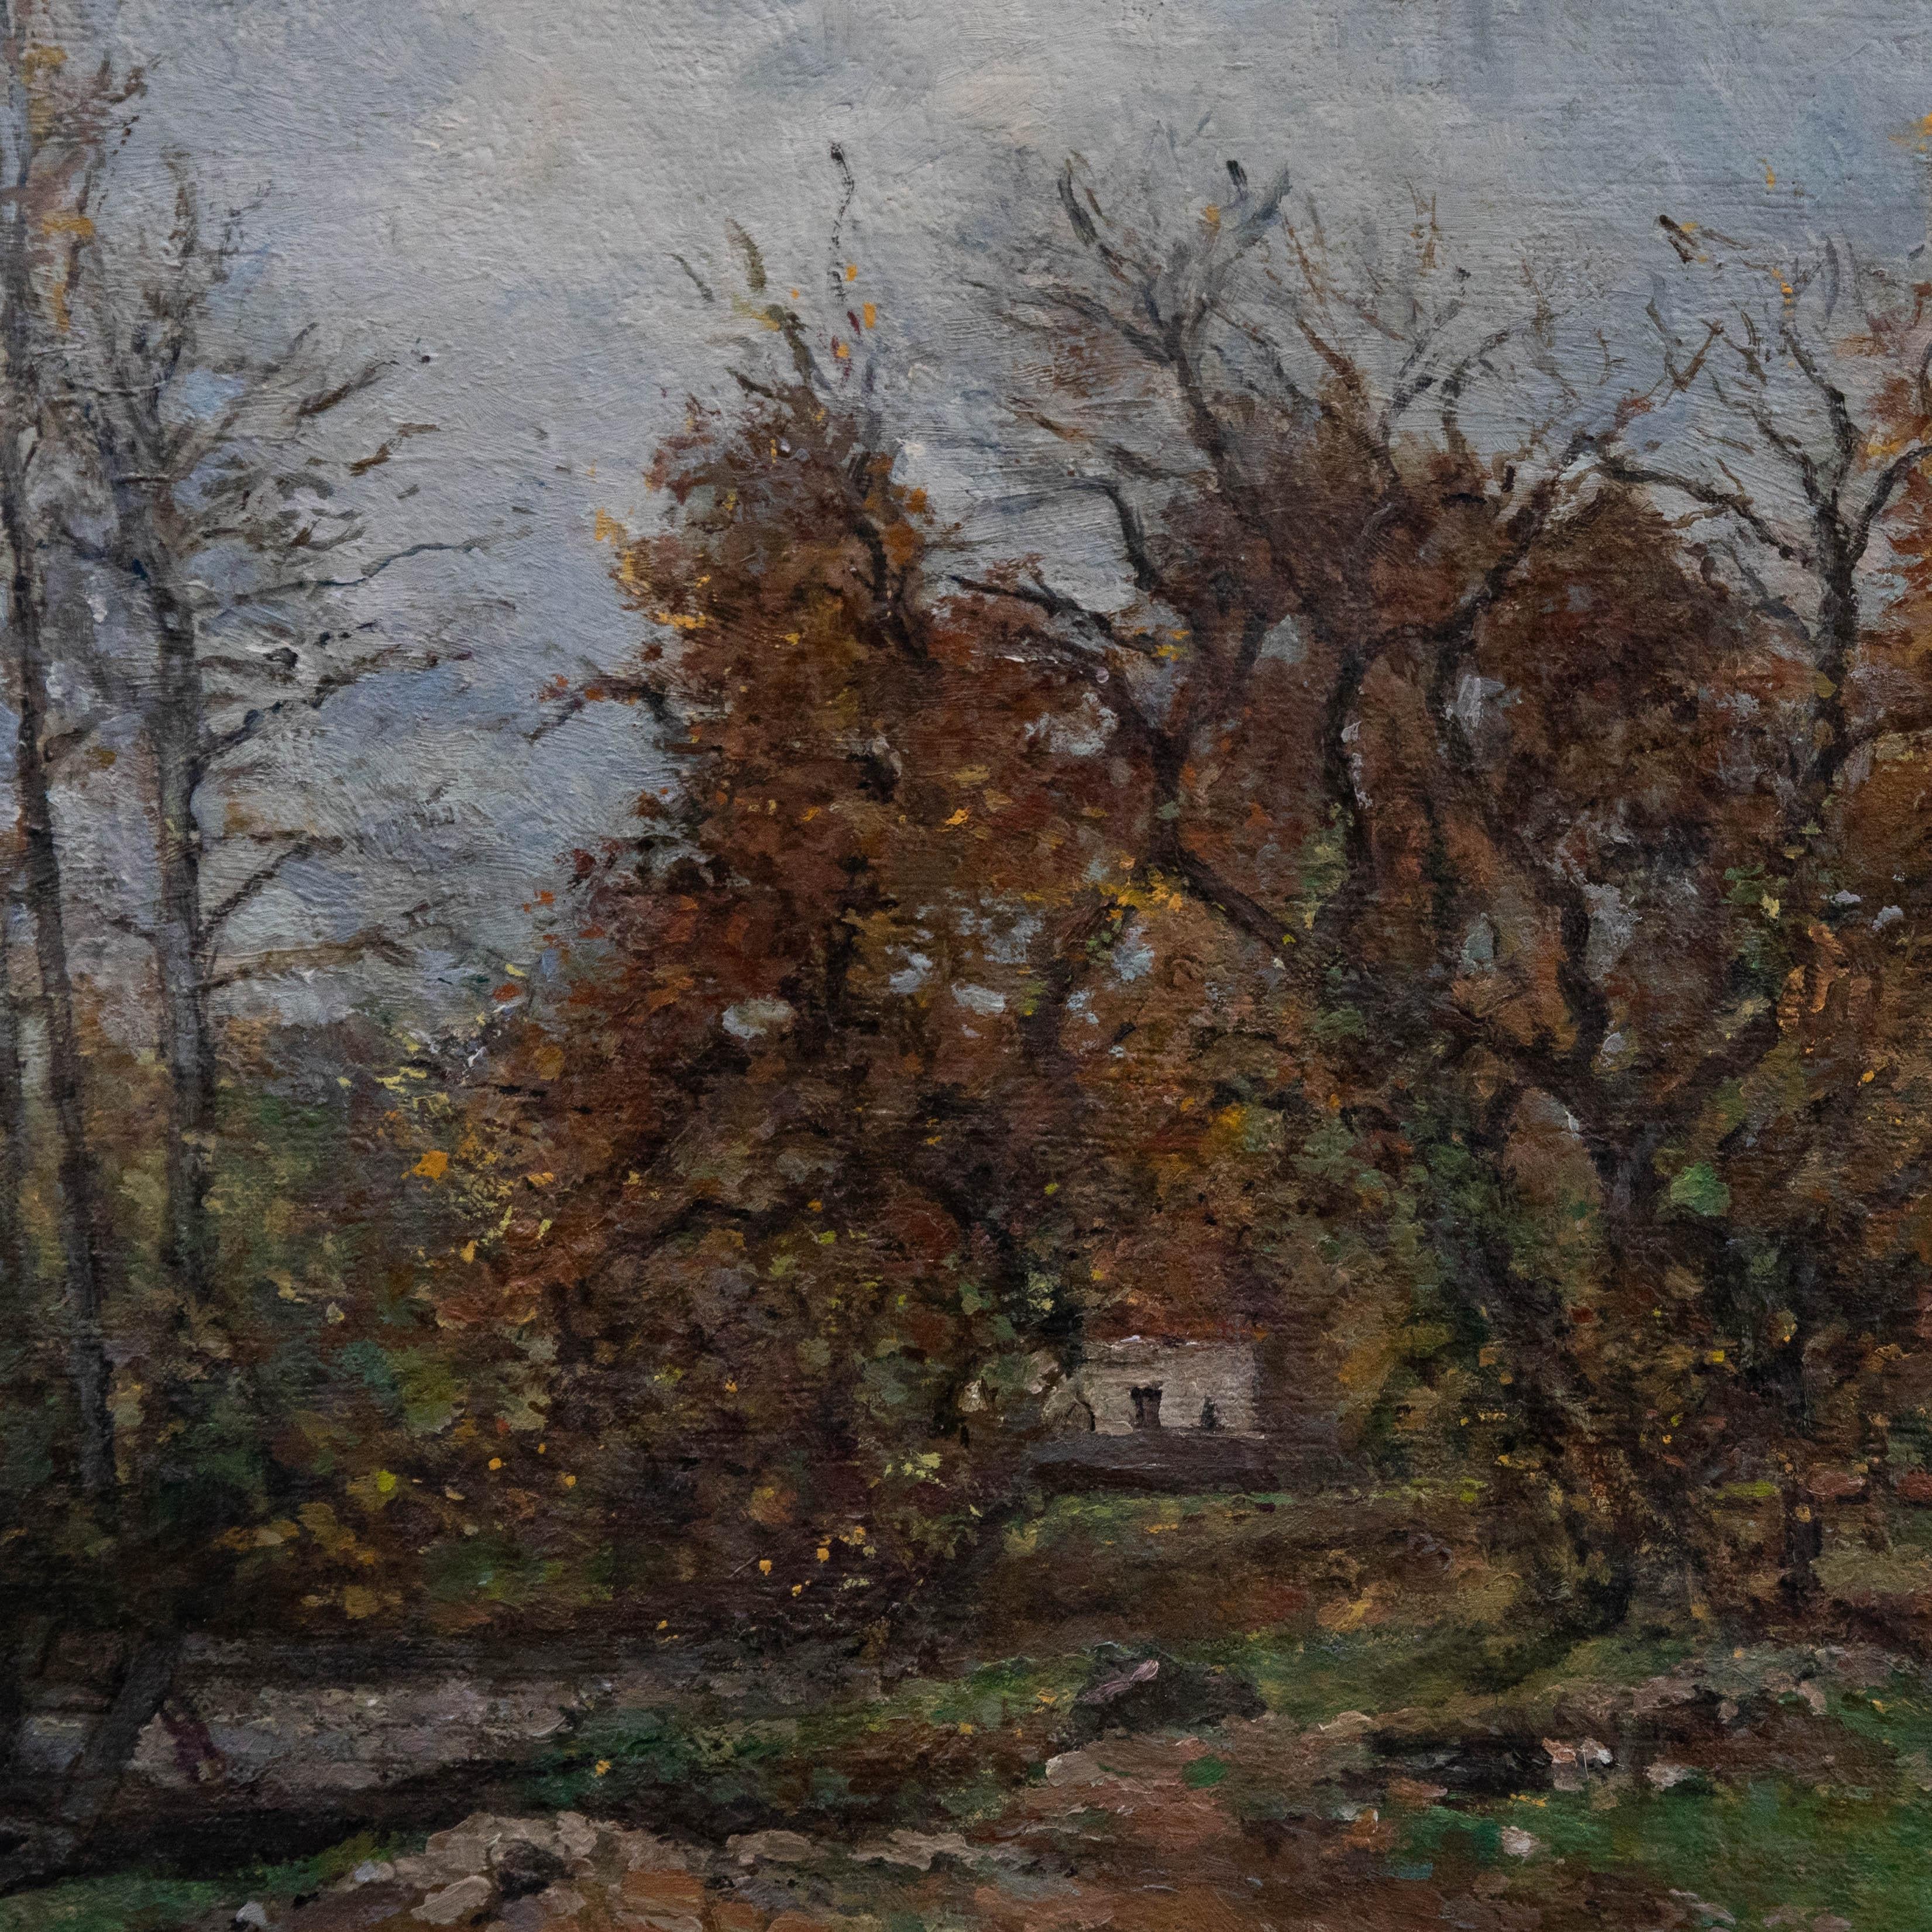 A charming oil study by well listed artist Josephine Haswell Miller. The scene depicts a meadow lined with trees in late autumn. Through the branches a quaint cottage can be seen in the near distance. The artist demonstrates an accomplished hand in